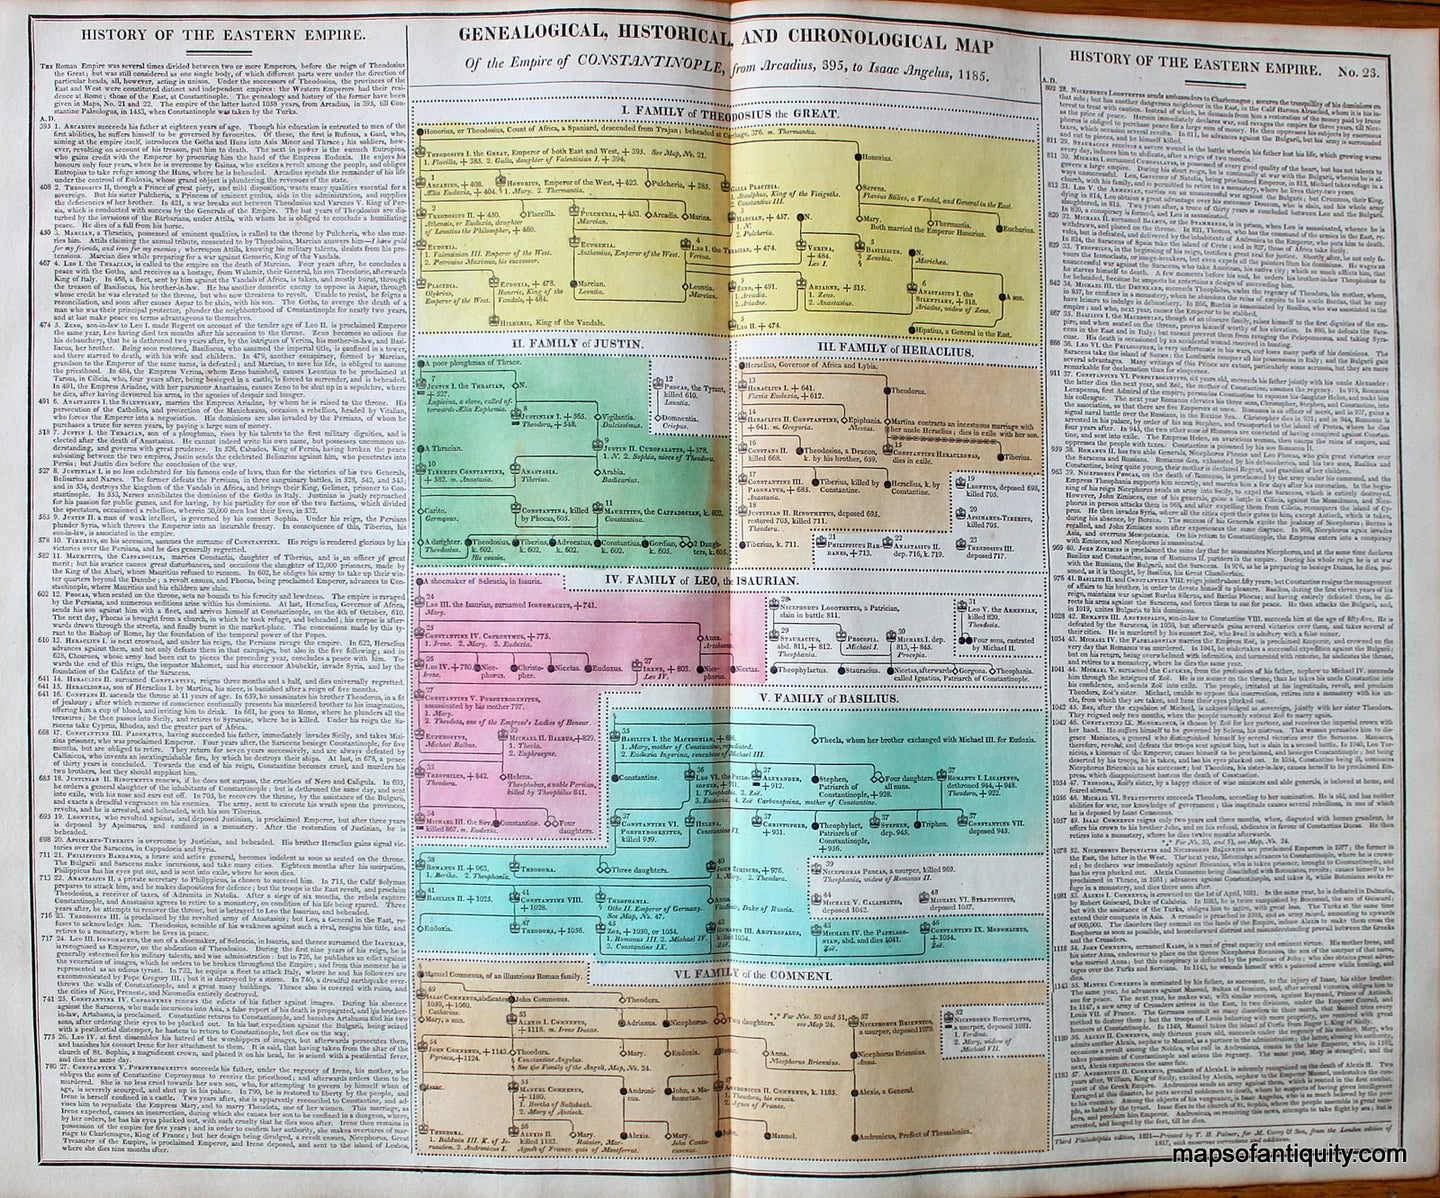 Hand-Colored-Antique-Timeline-Genealogical-Historical-and-Chronological-Map-of-the-Empire-of-Constantinople-from-Arcadius-395-to-Isaac-Angelus-1185.-No.-23.-Other-World-1821-Lavoisne-Maps-Of-Antiquity